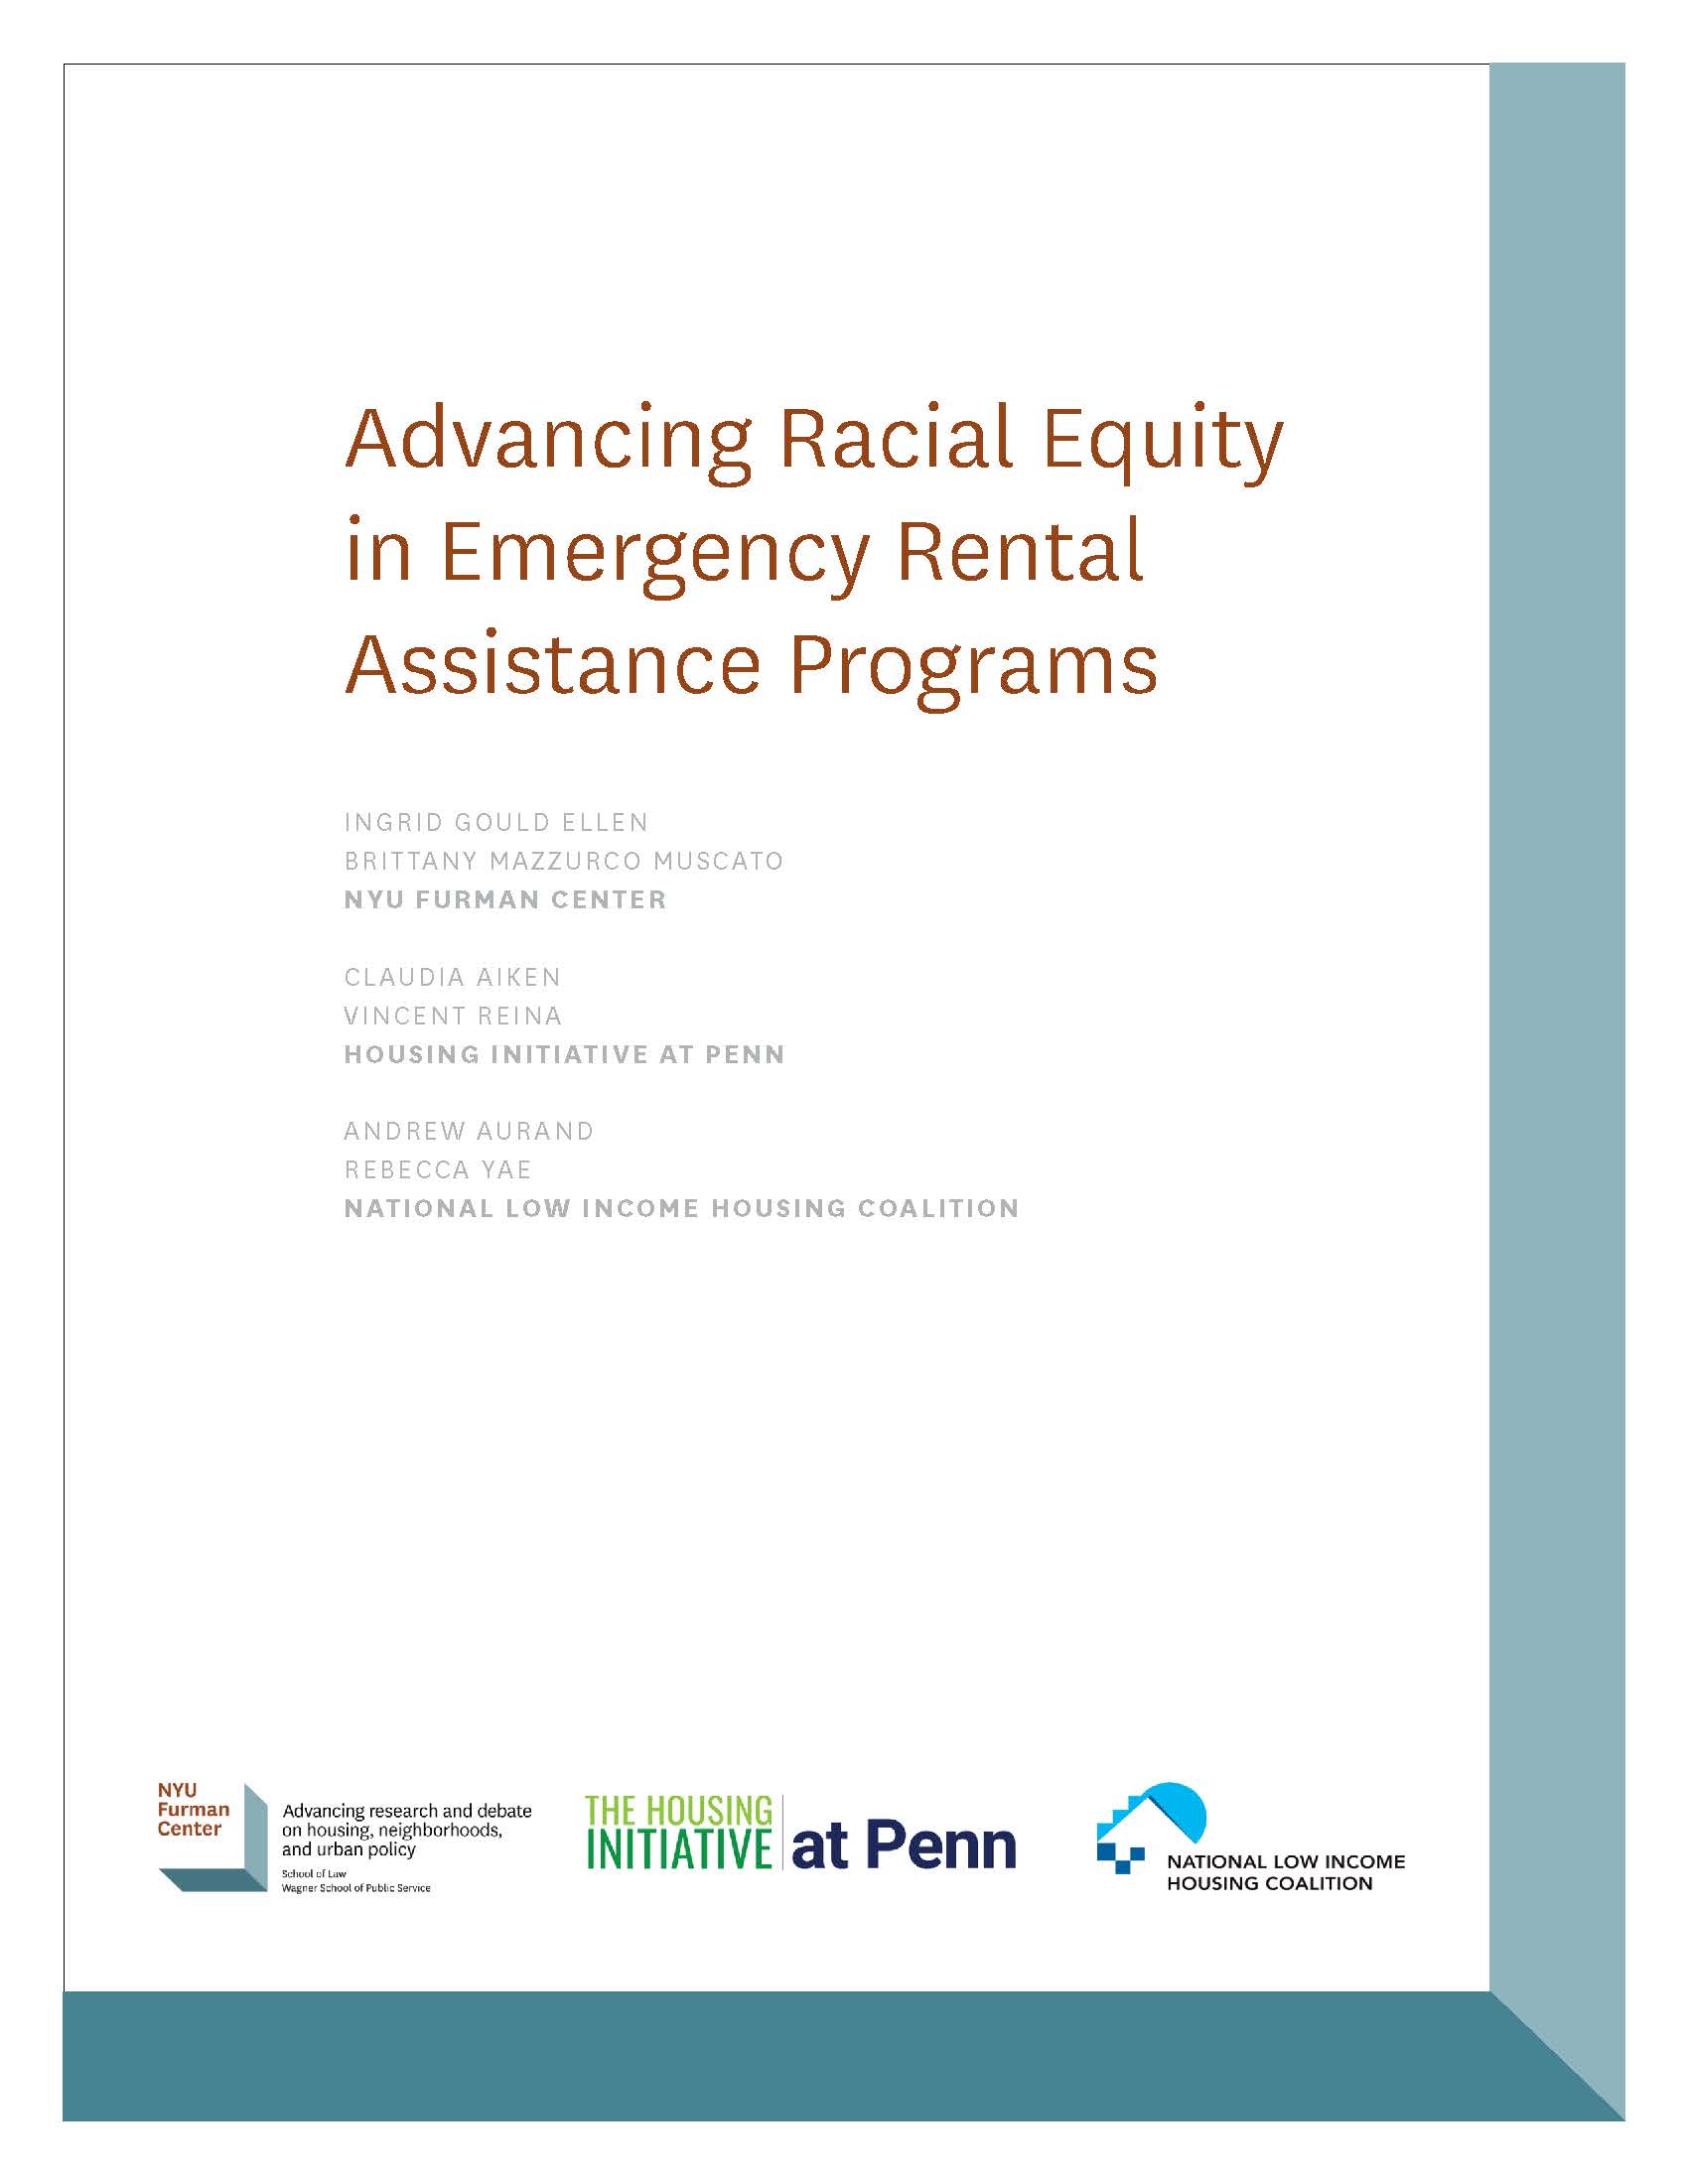 Advancing Racial Equity in Emergency Rental Assistance Programs